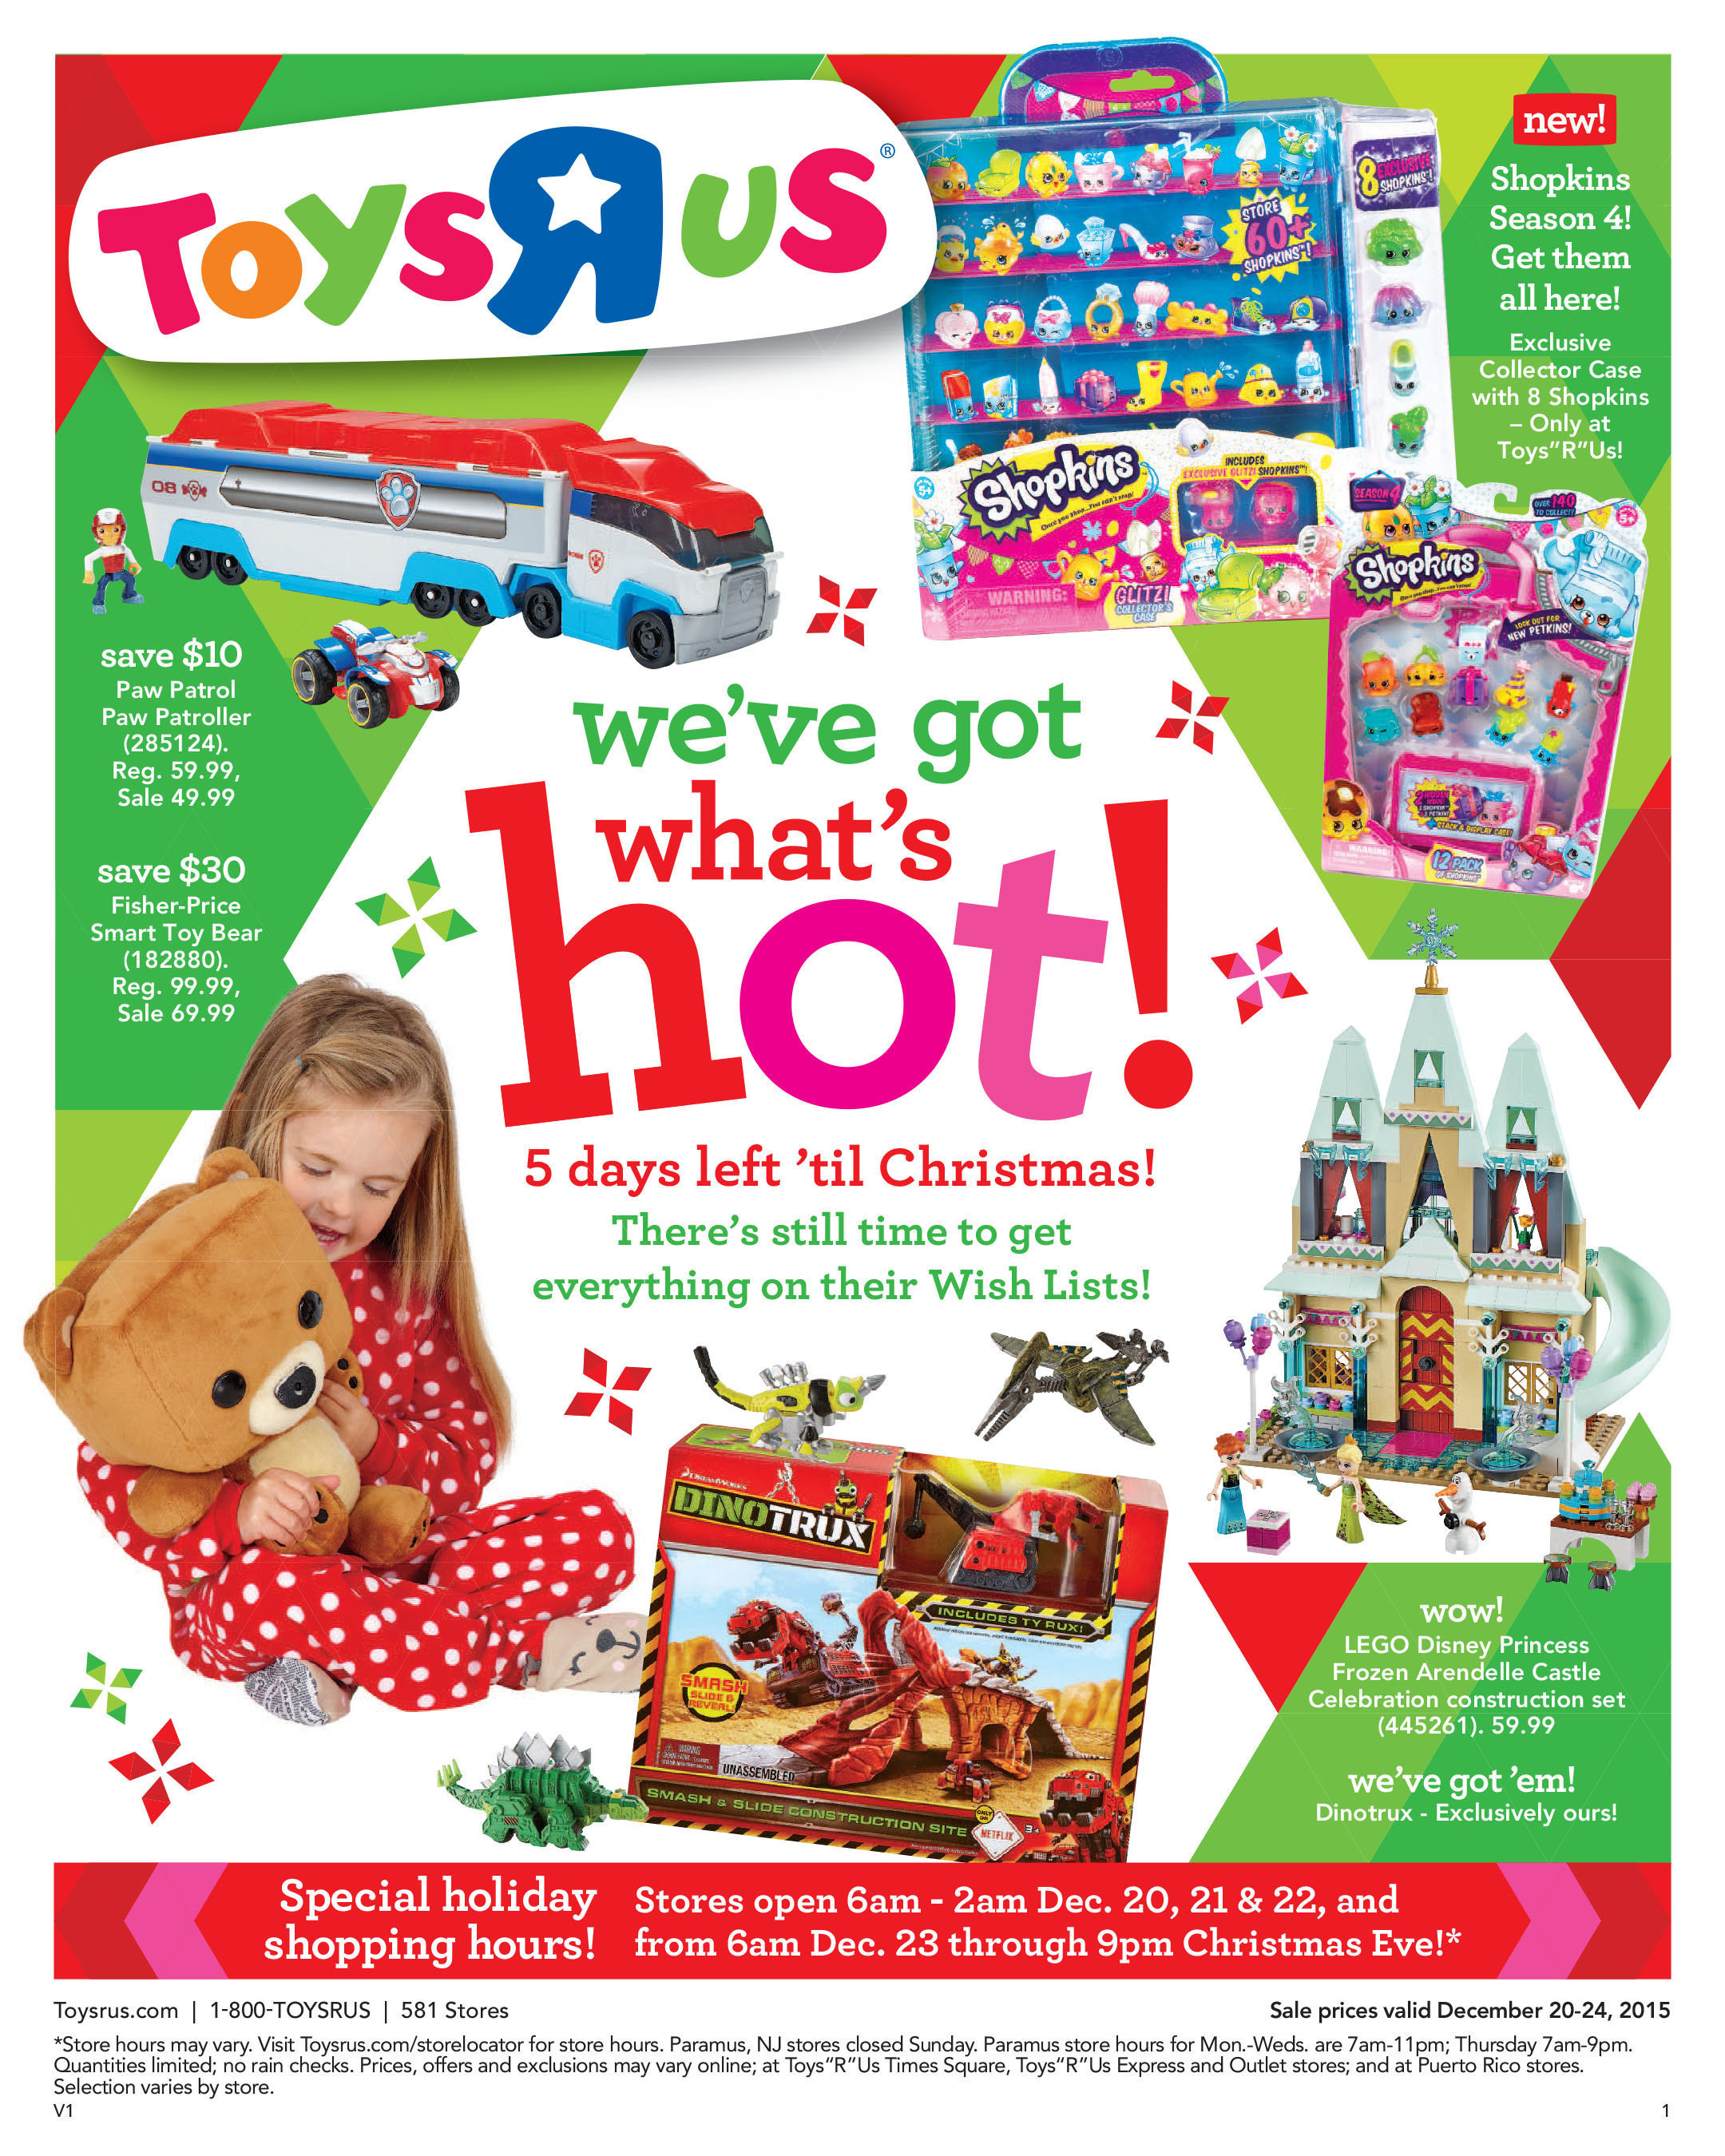 Toys R Us Offers Extended Hours